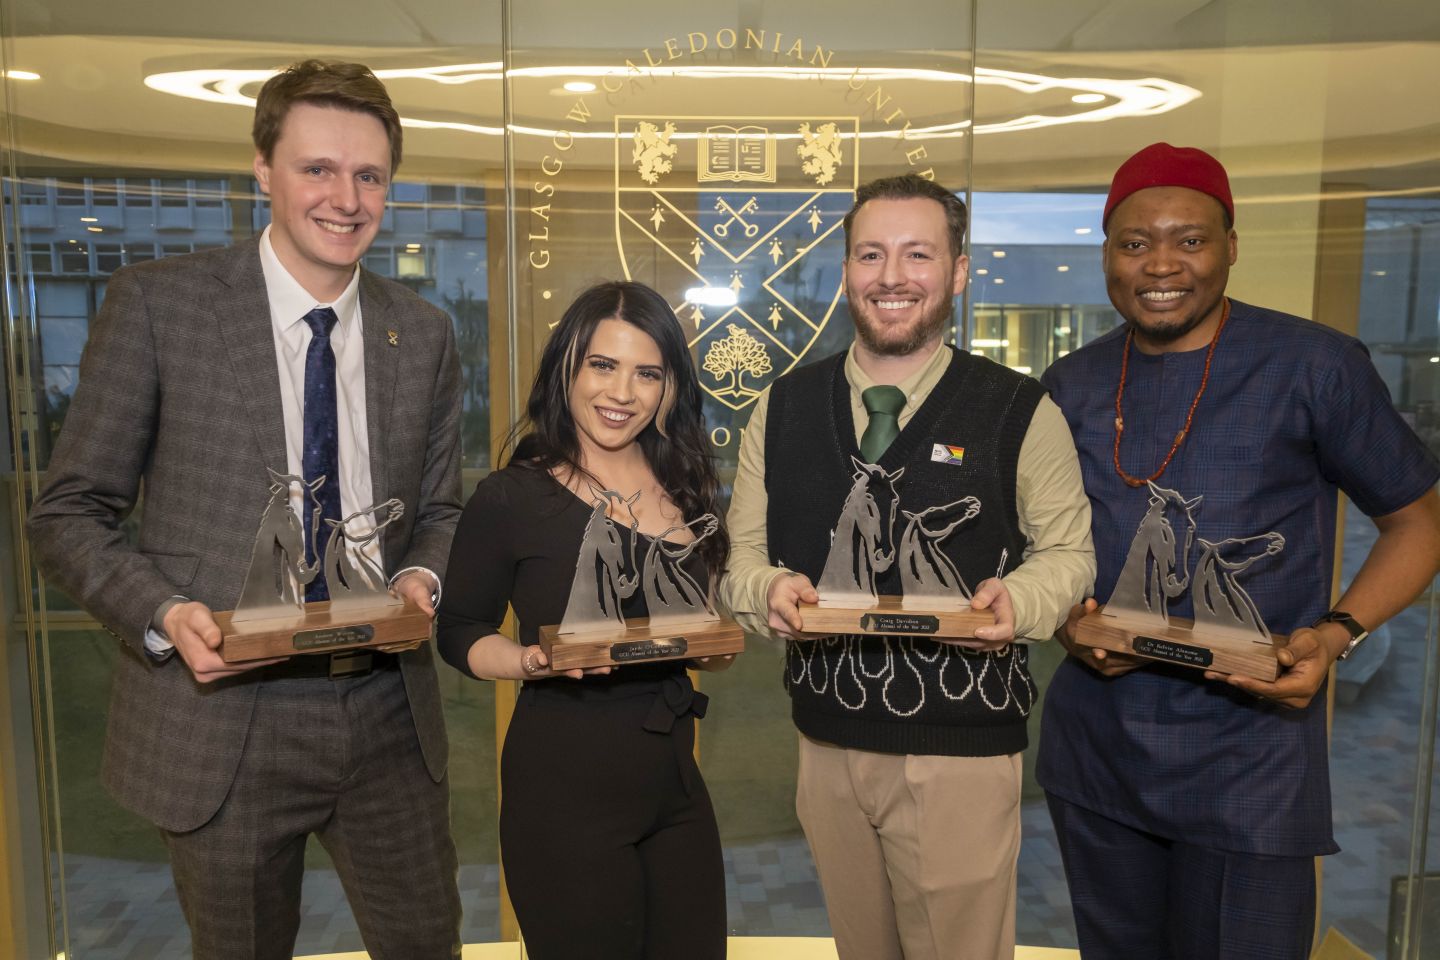 Group photo of the 4 GCU Alumni of the Year winners (AOTY) holding their AOTY awards.